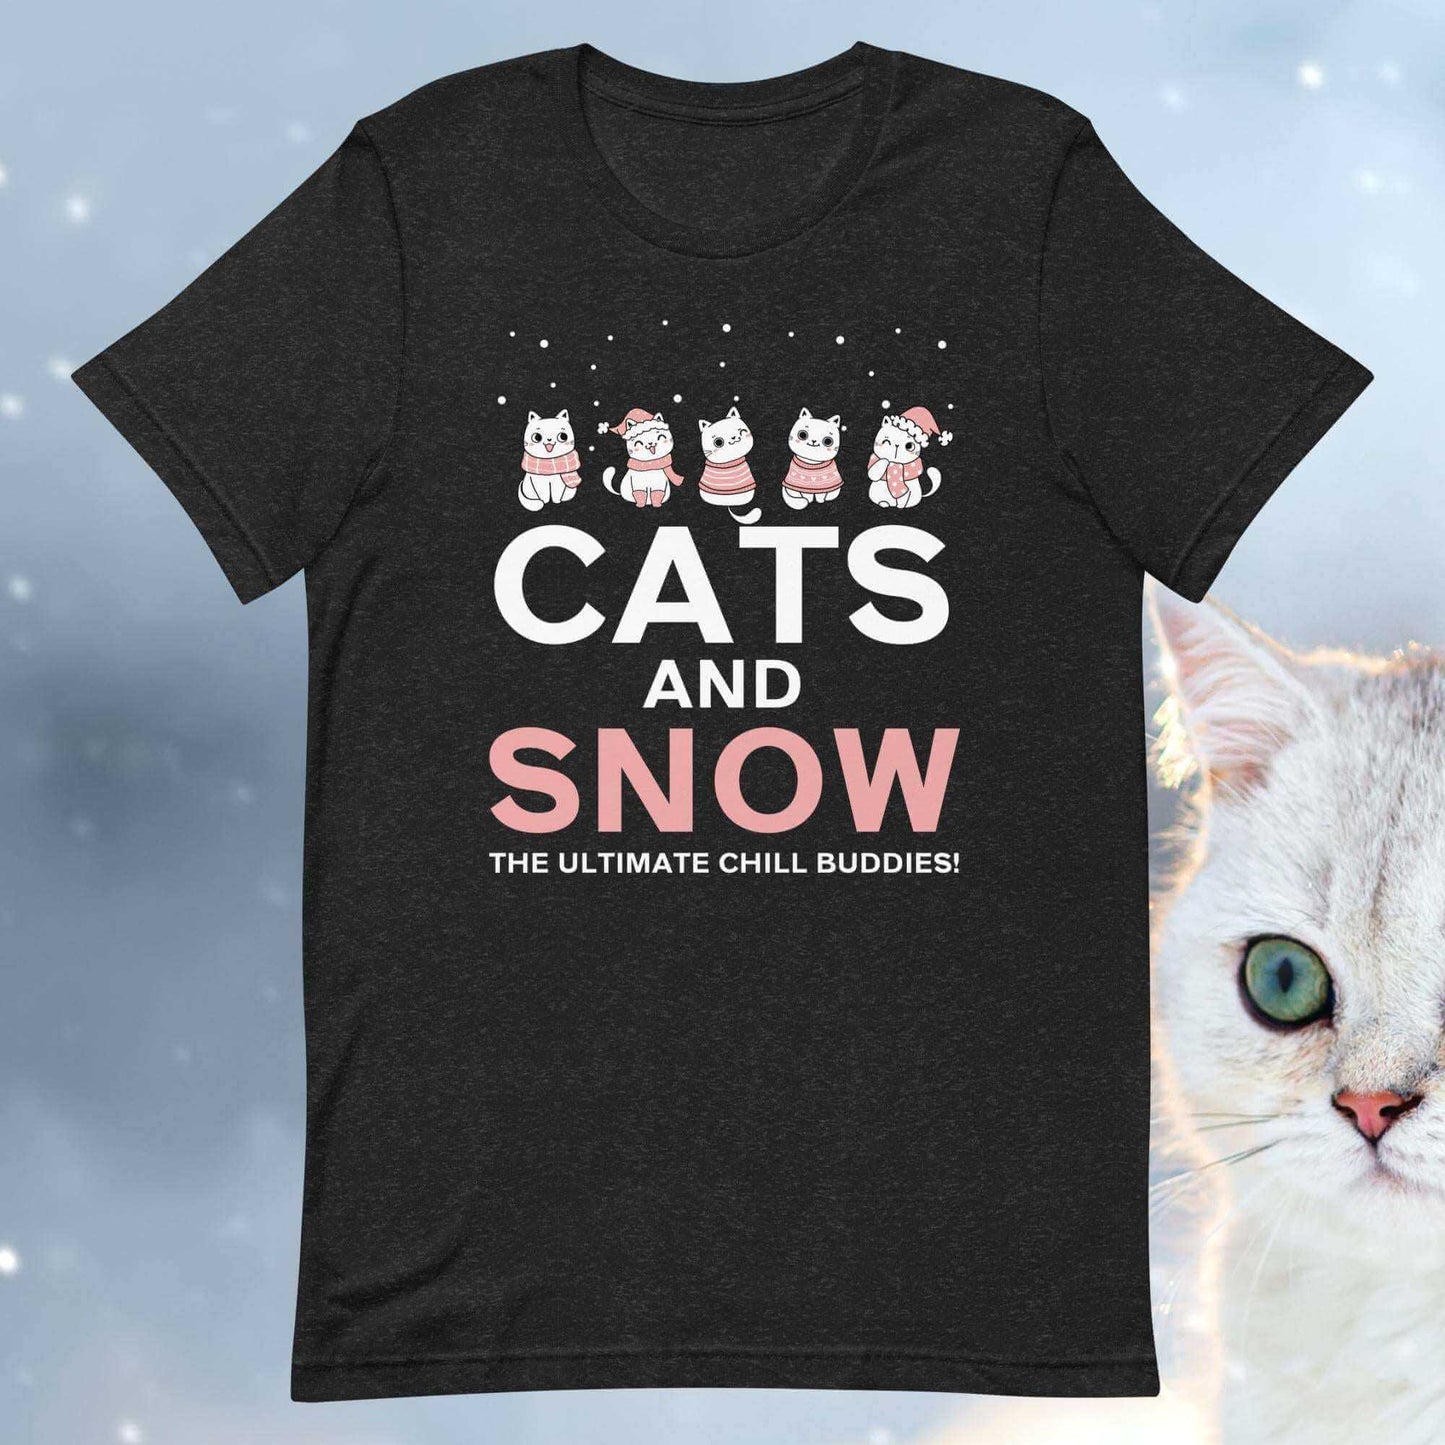 Cats and Snow: The Ultimate Chill Buddies! Unisex t-shirt